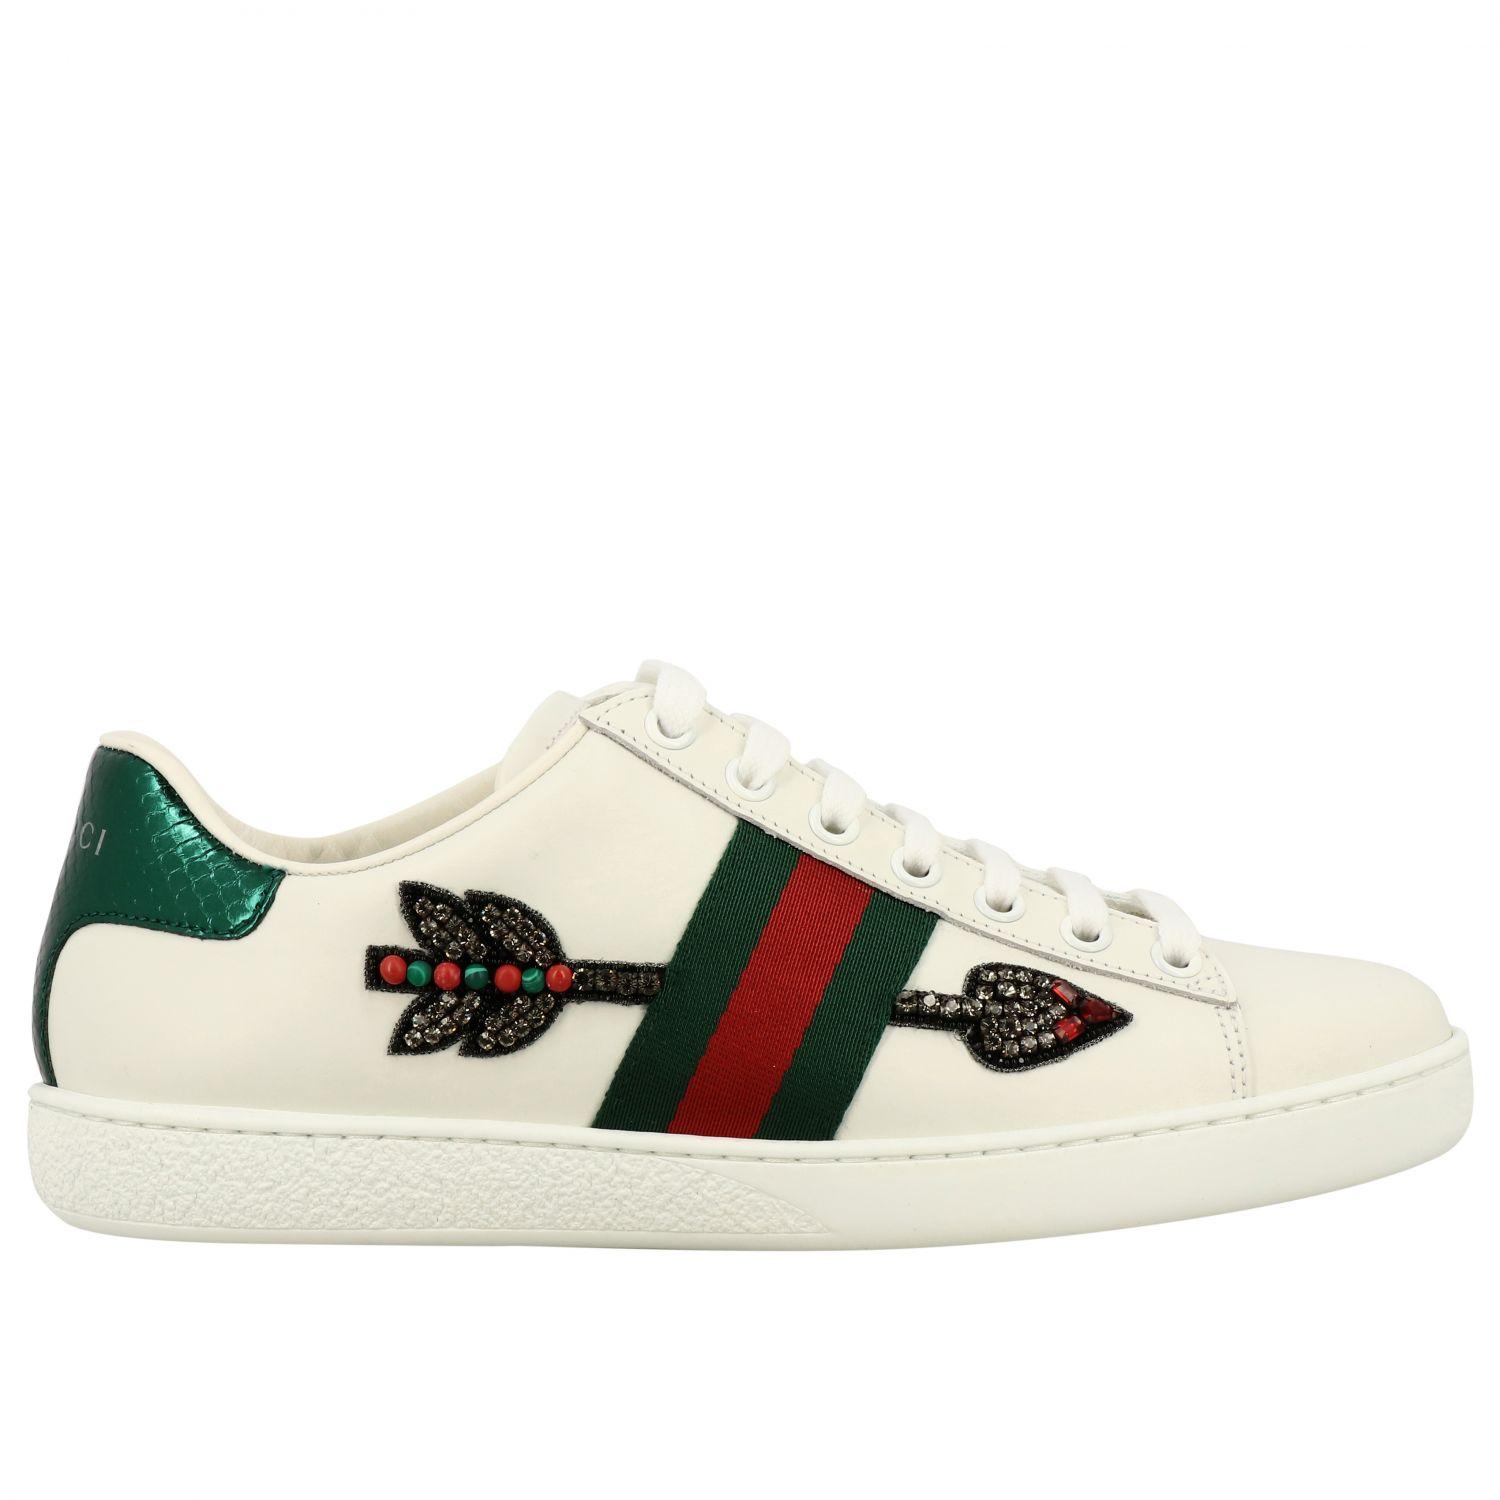 Gucci Sneakers Shoes Women in White - Lyst